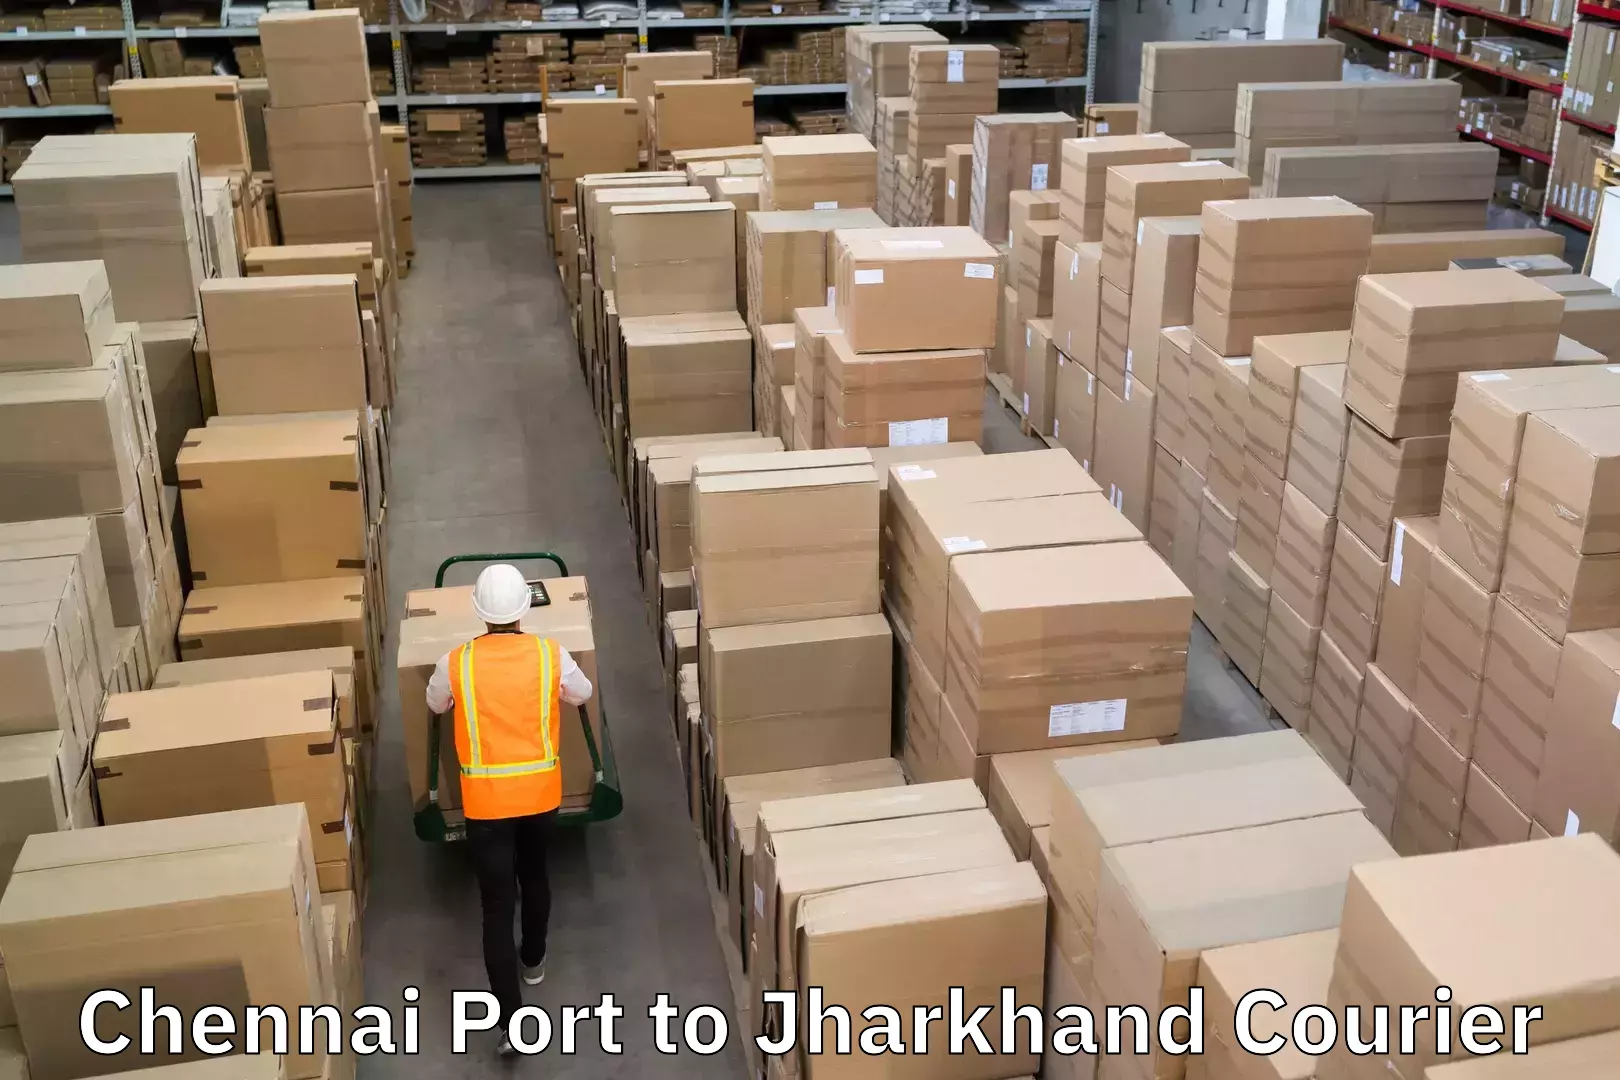 Fast shipping solutions Chennai Port to Jharkhand